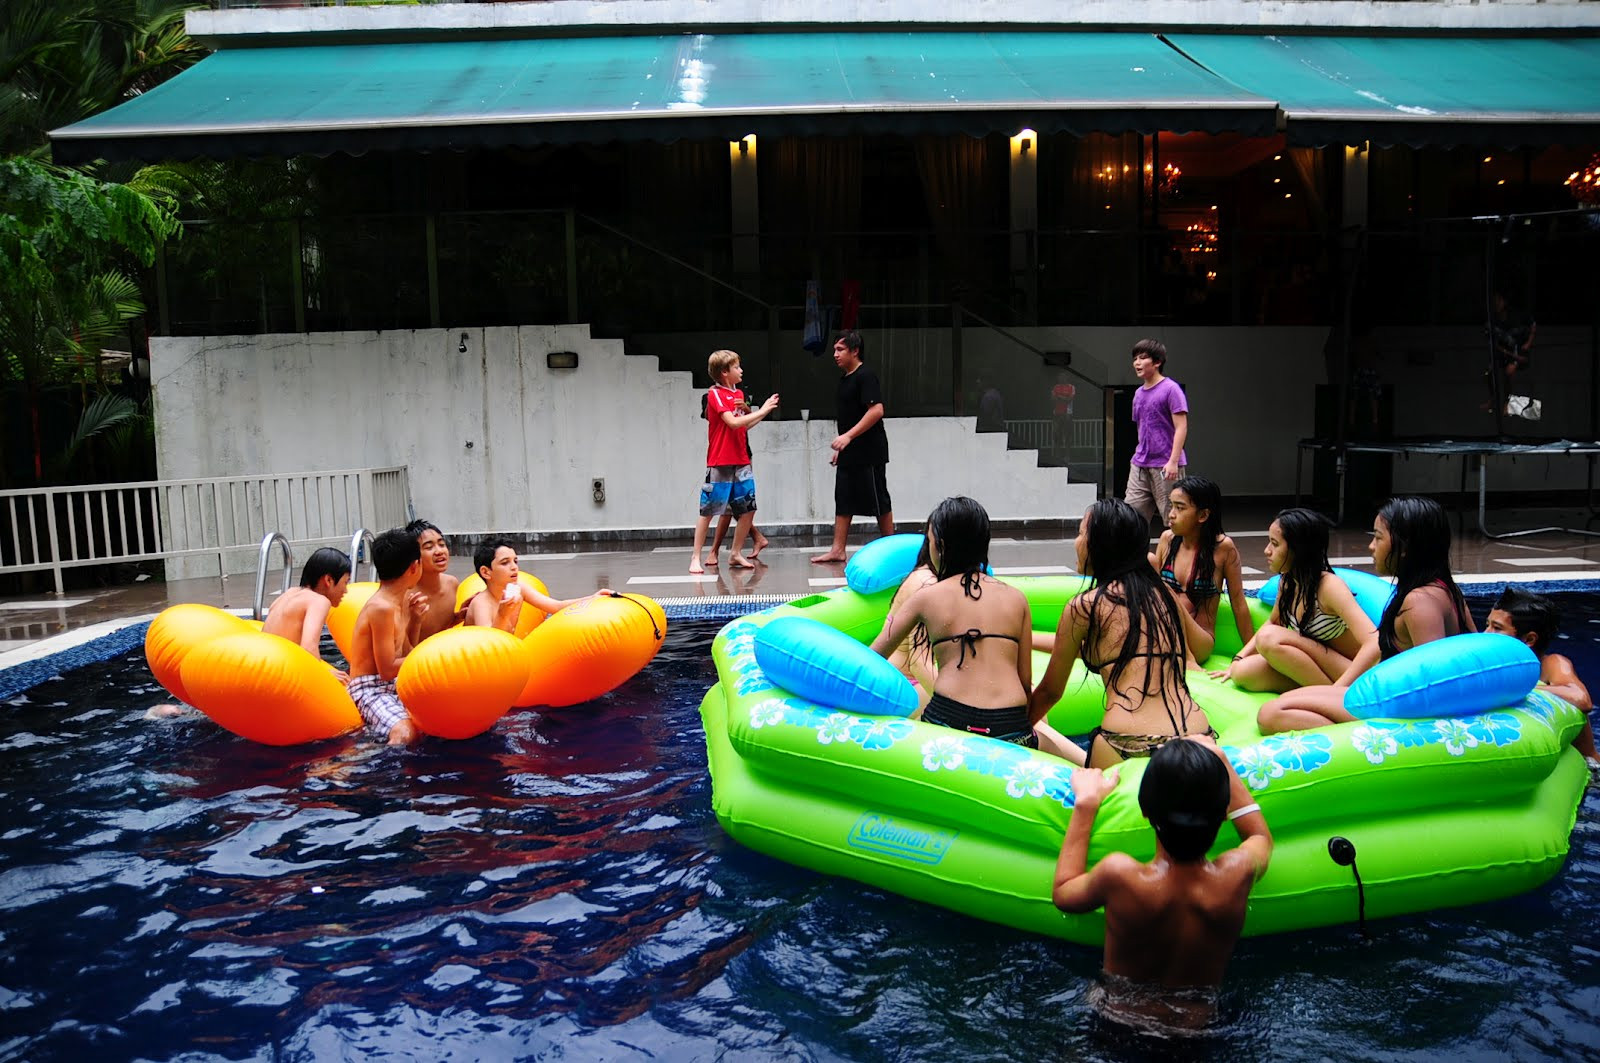 Pool Party Ideas For Teenagers
 Event DirecTus Pool Party FUN for KIDS TEENS & ADULTS